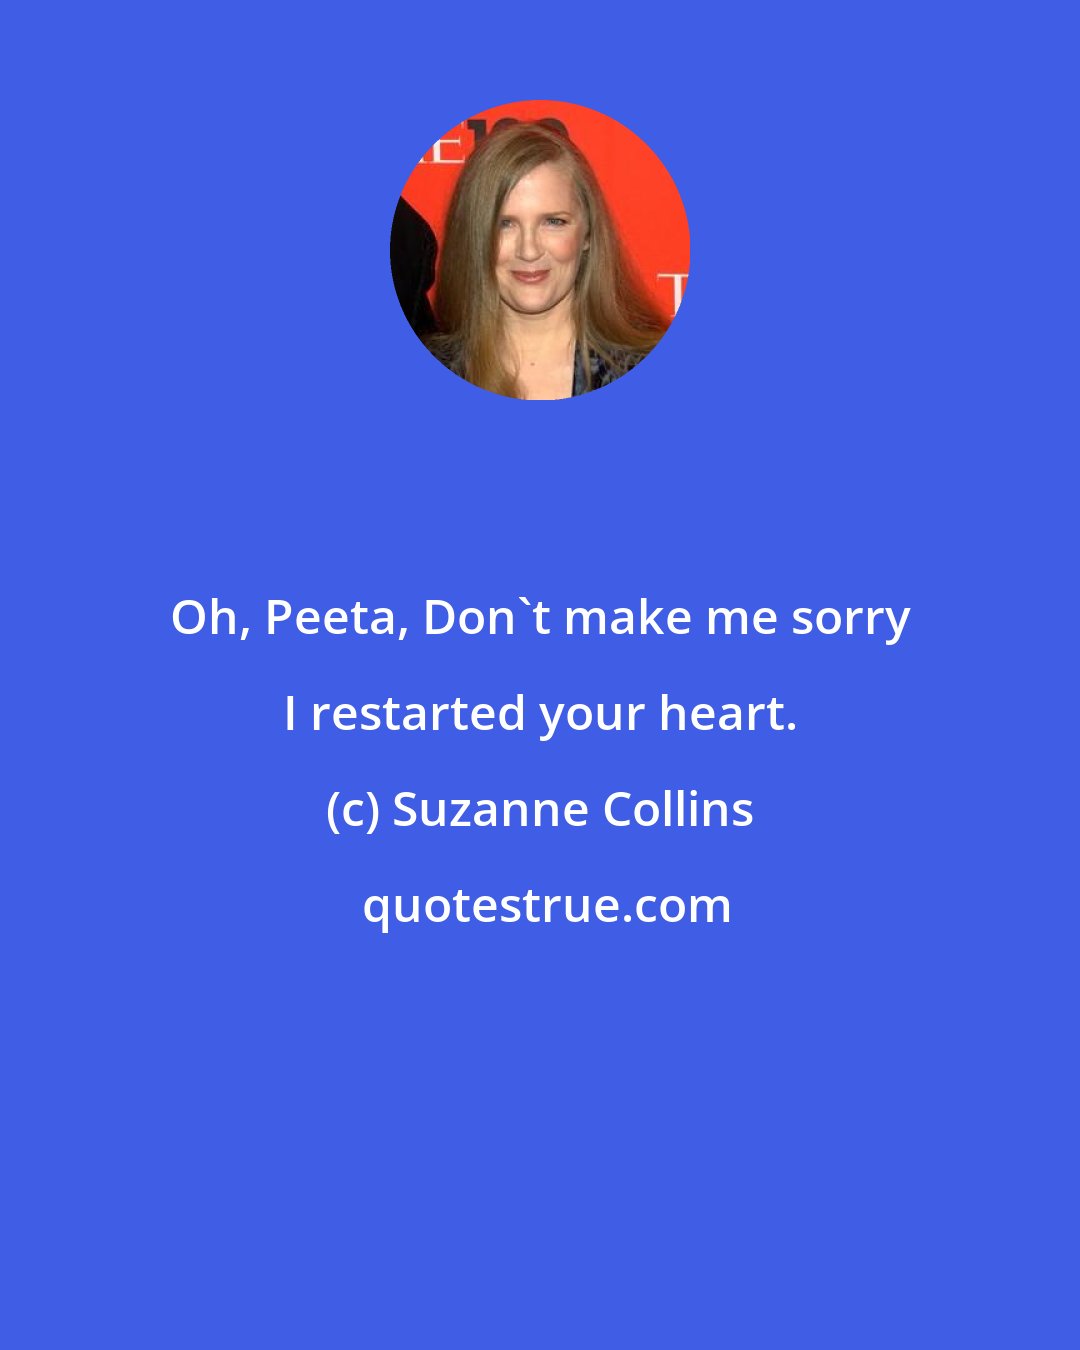 Suzanne Collins: Oh, Peeta, Don't make me sorry I restarted your heart.